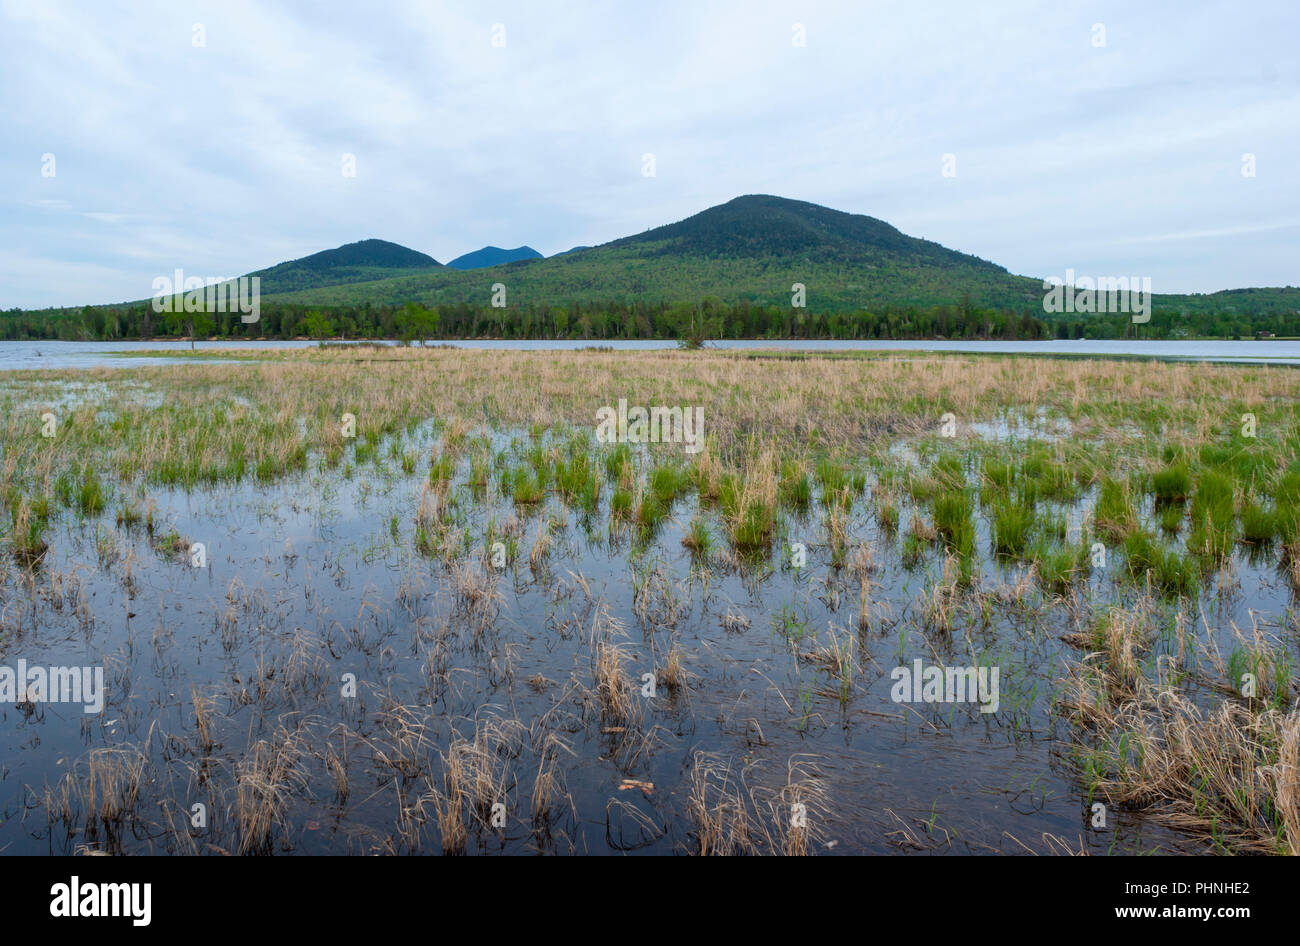 Bigelow Mountain behind the Flagstaff Lake. Cordgrass on a marshy shore. Scenic overlook on Maine’s High Peaks Scenic Byway. Eustis, ME, USA Stock Photo